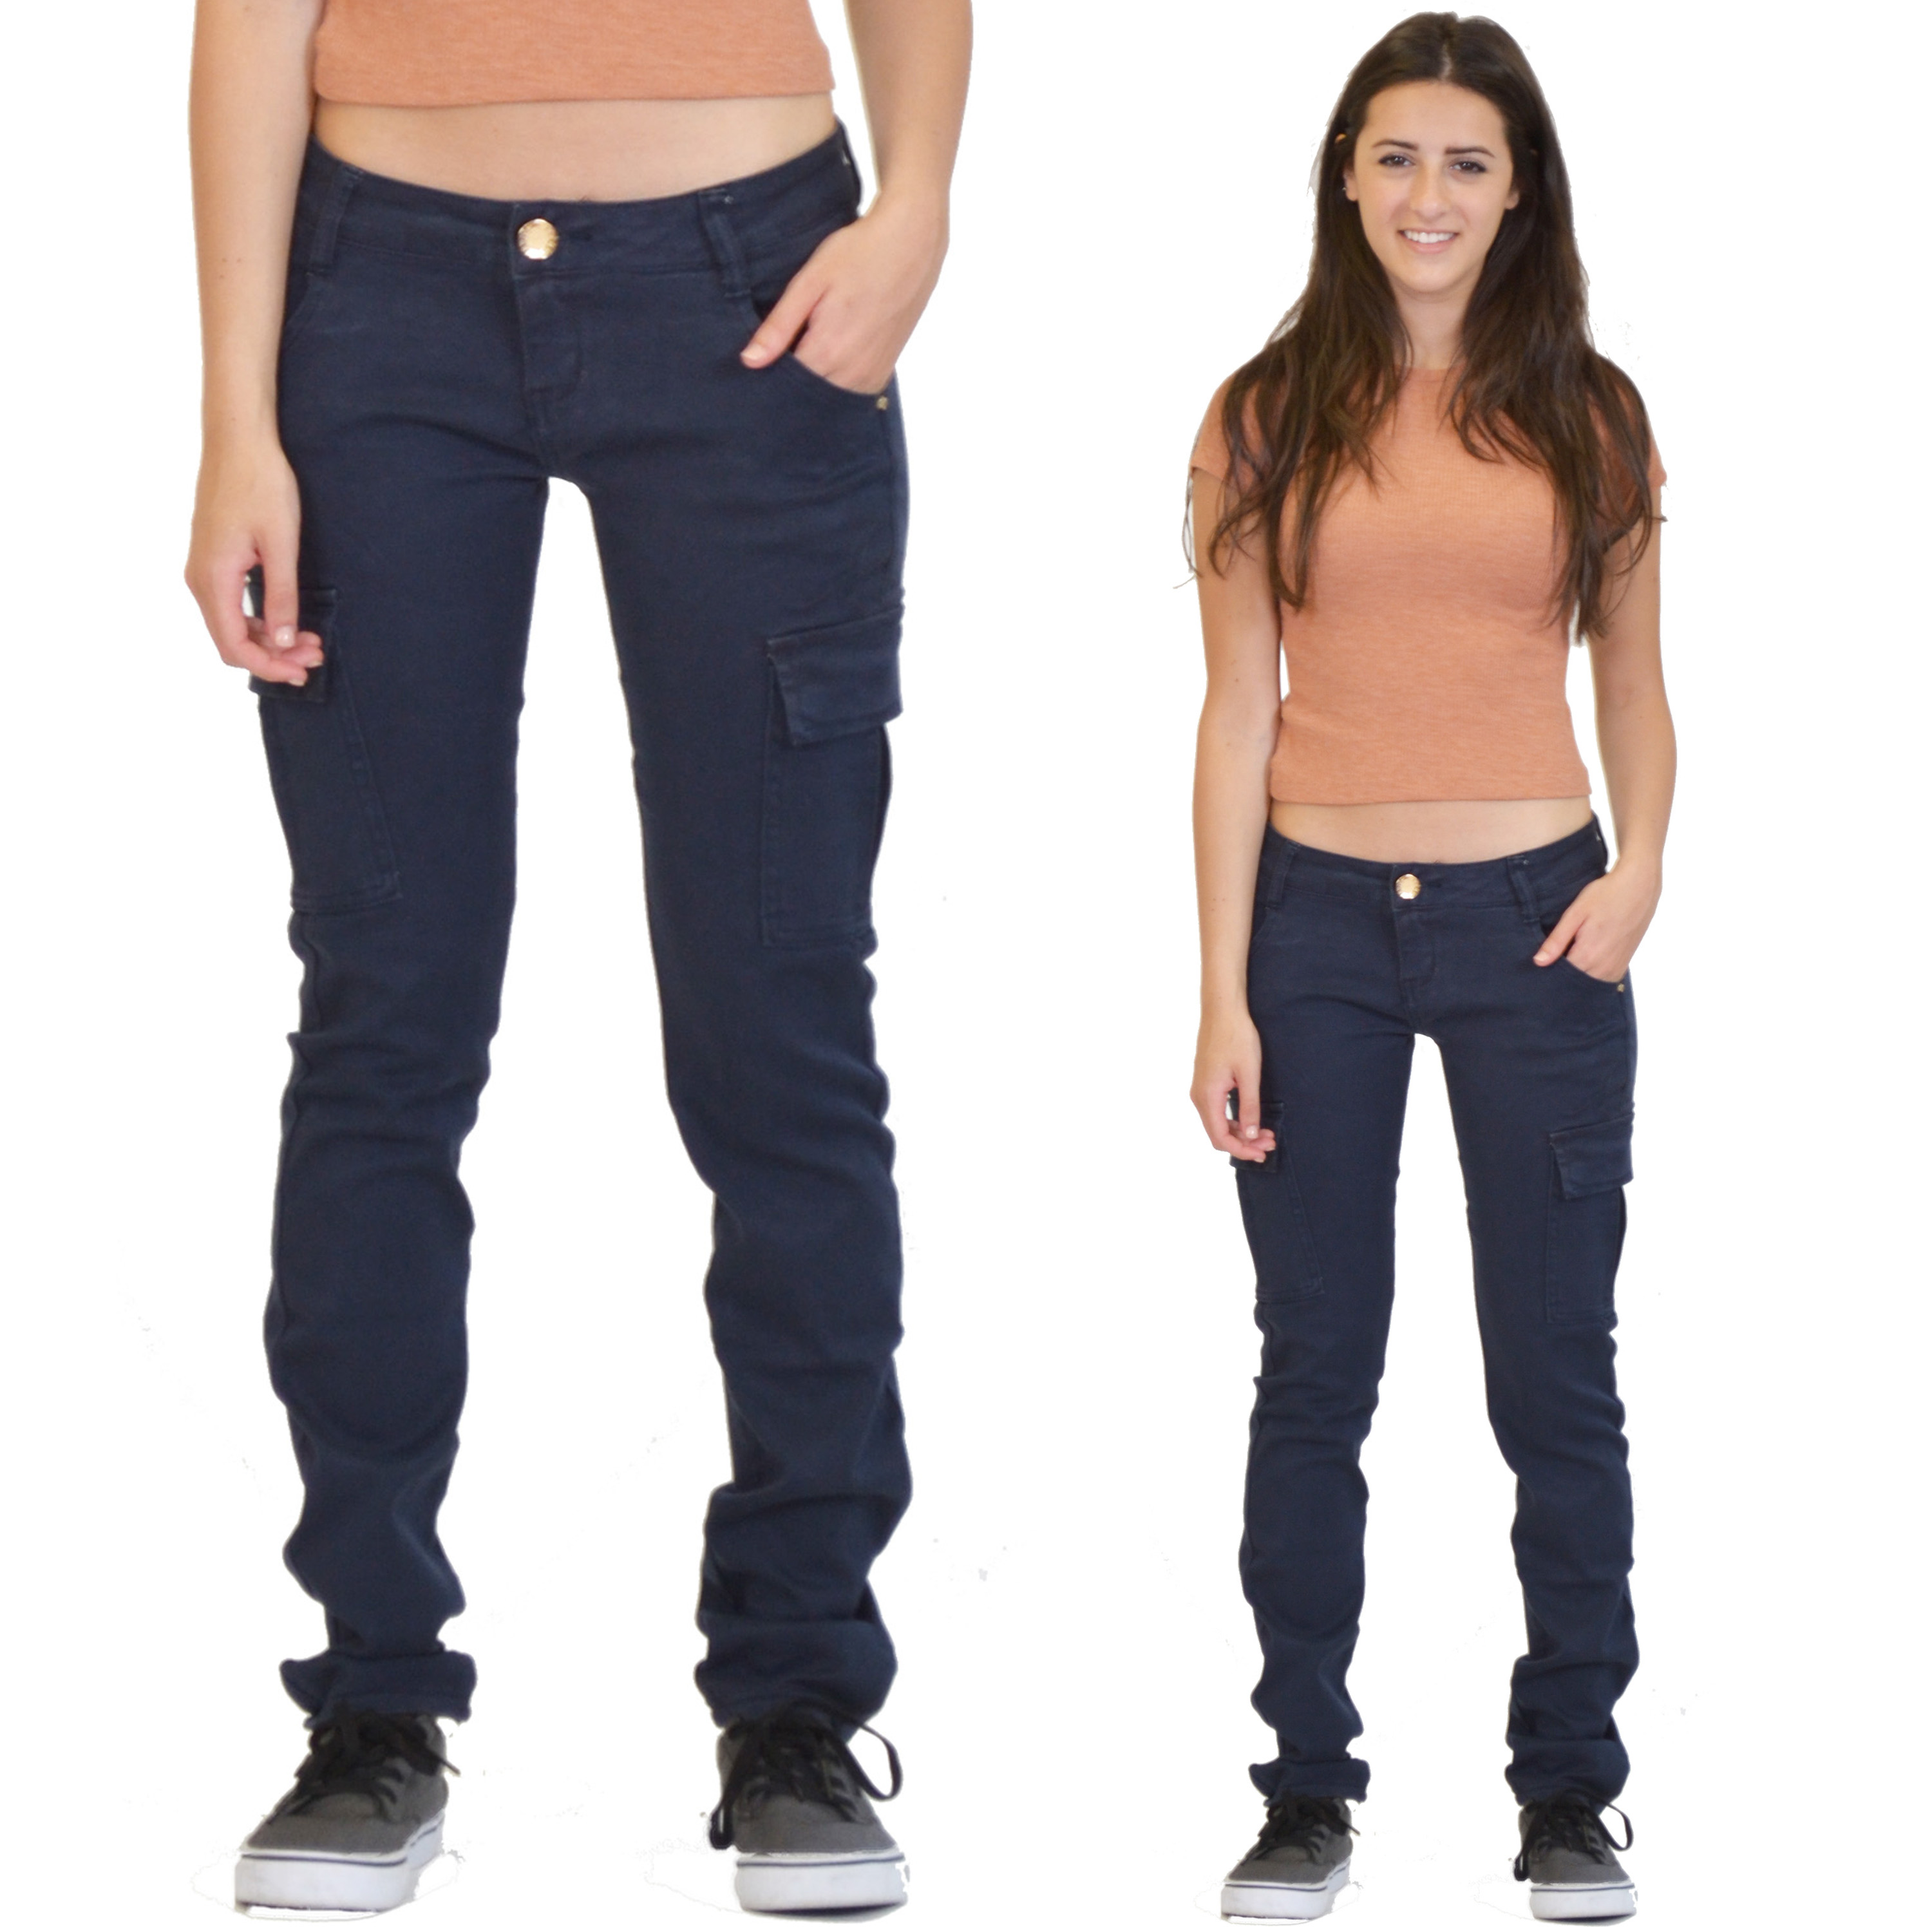 New Womens Ladies Slim Fitted Stretch Combat Jeans Pants Skinny Cargo Trousers Ebay 